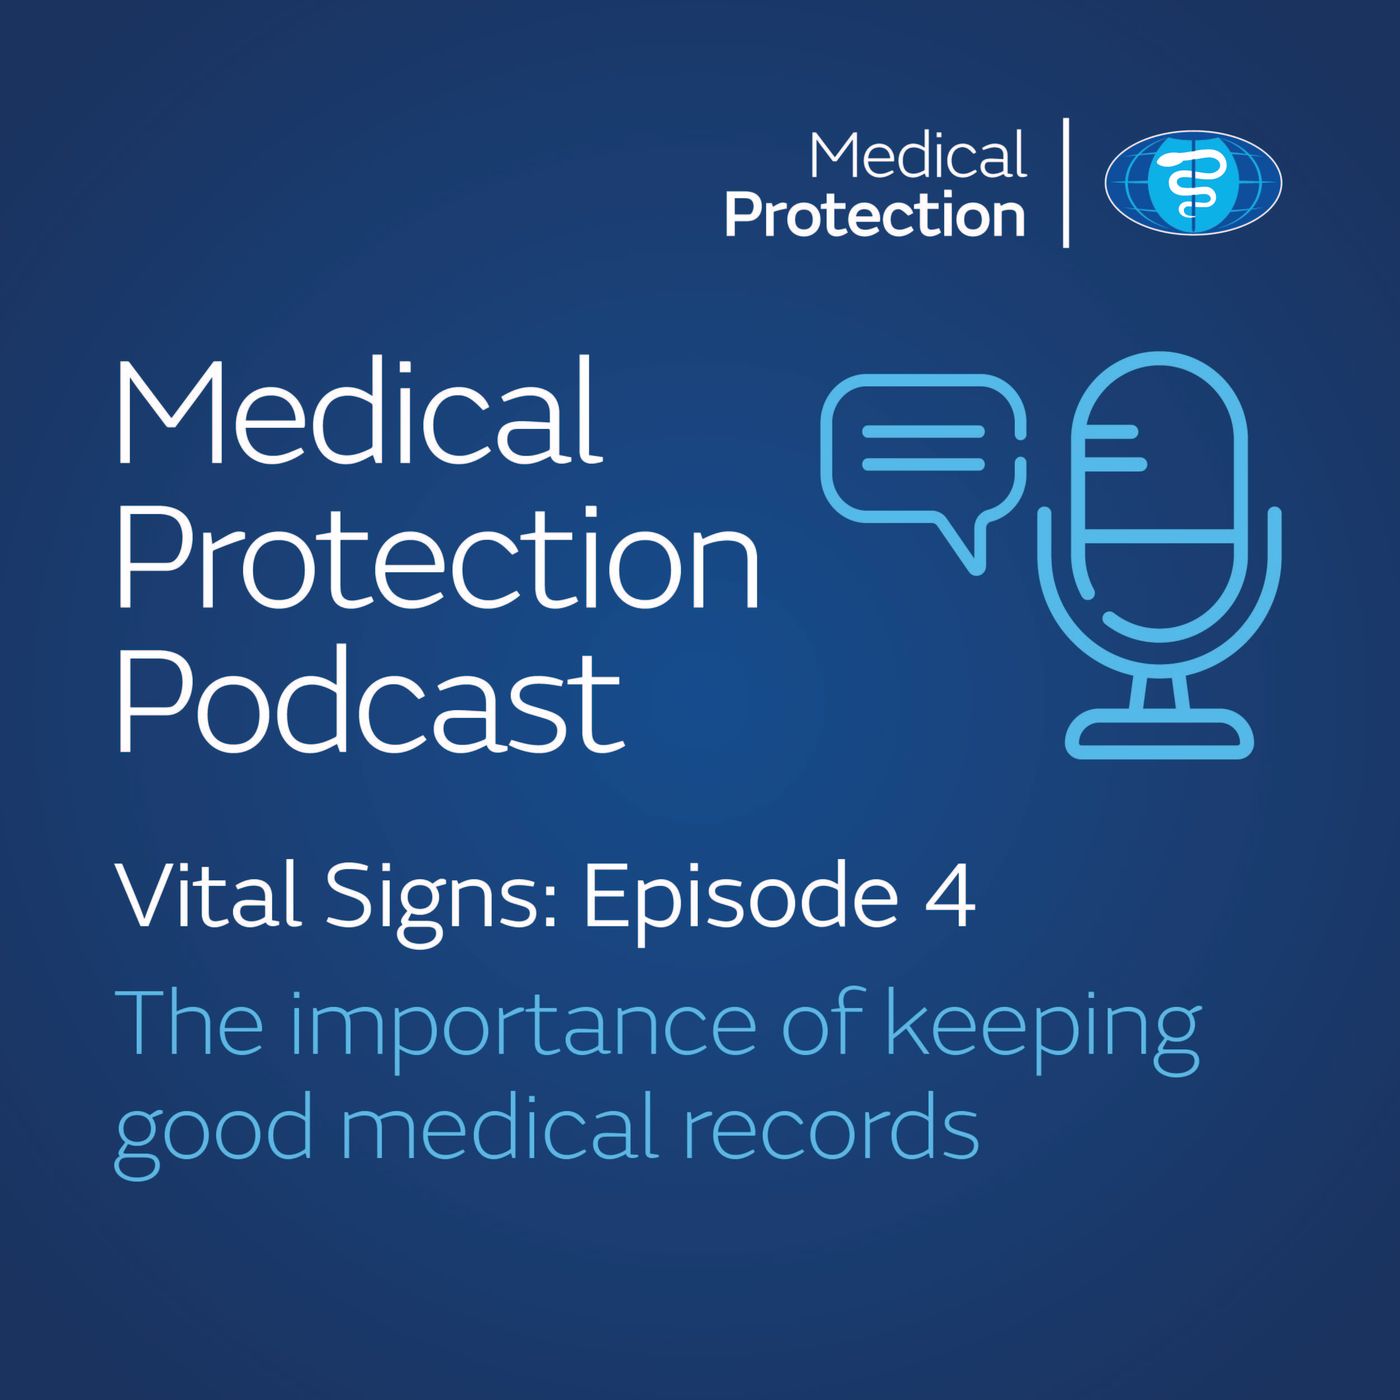 Vital Signs episode 4: The importance of keeping good medical records